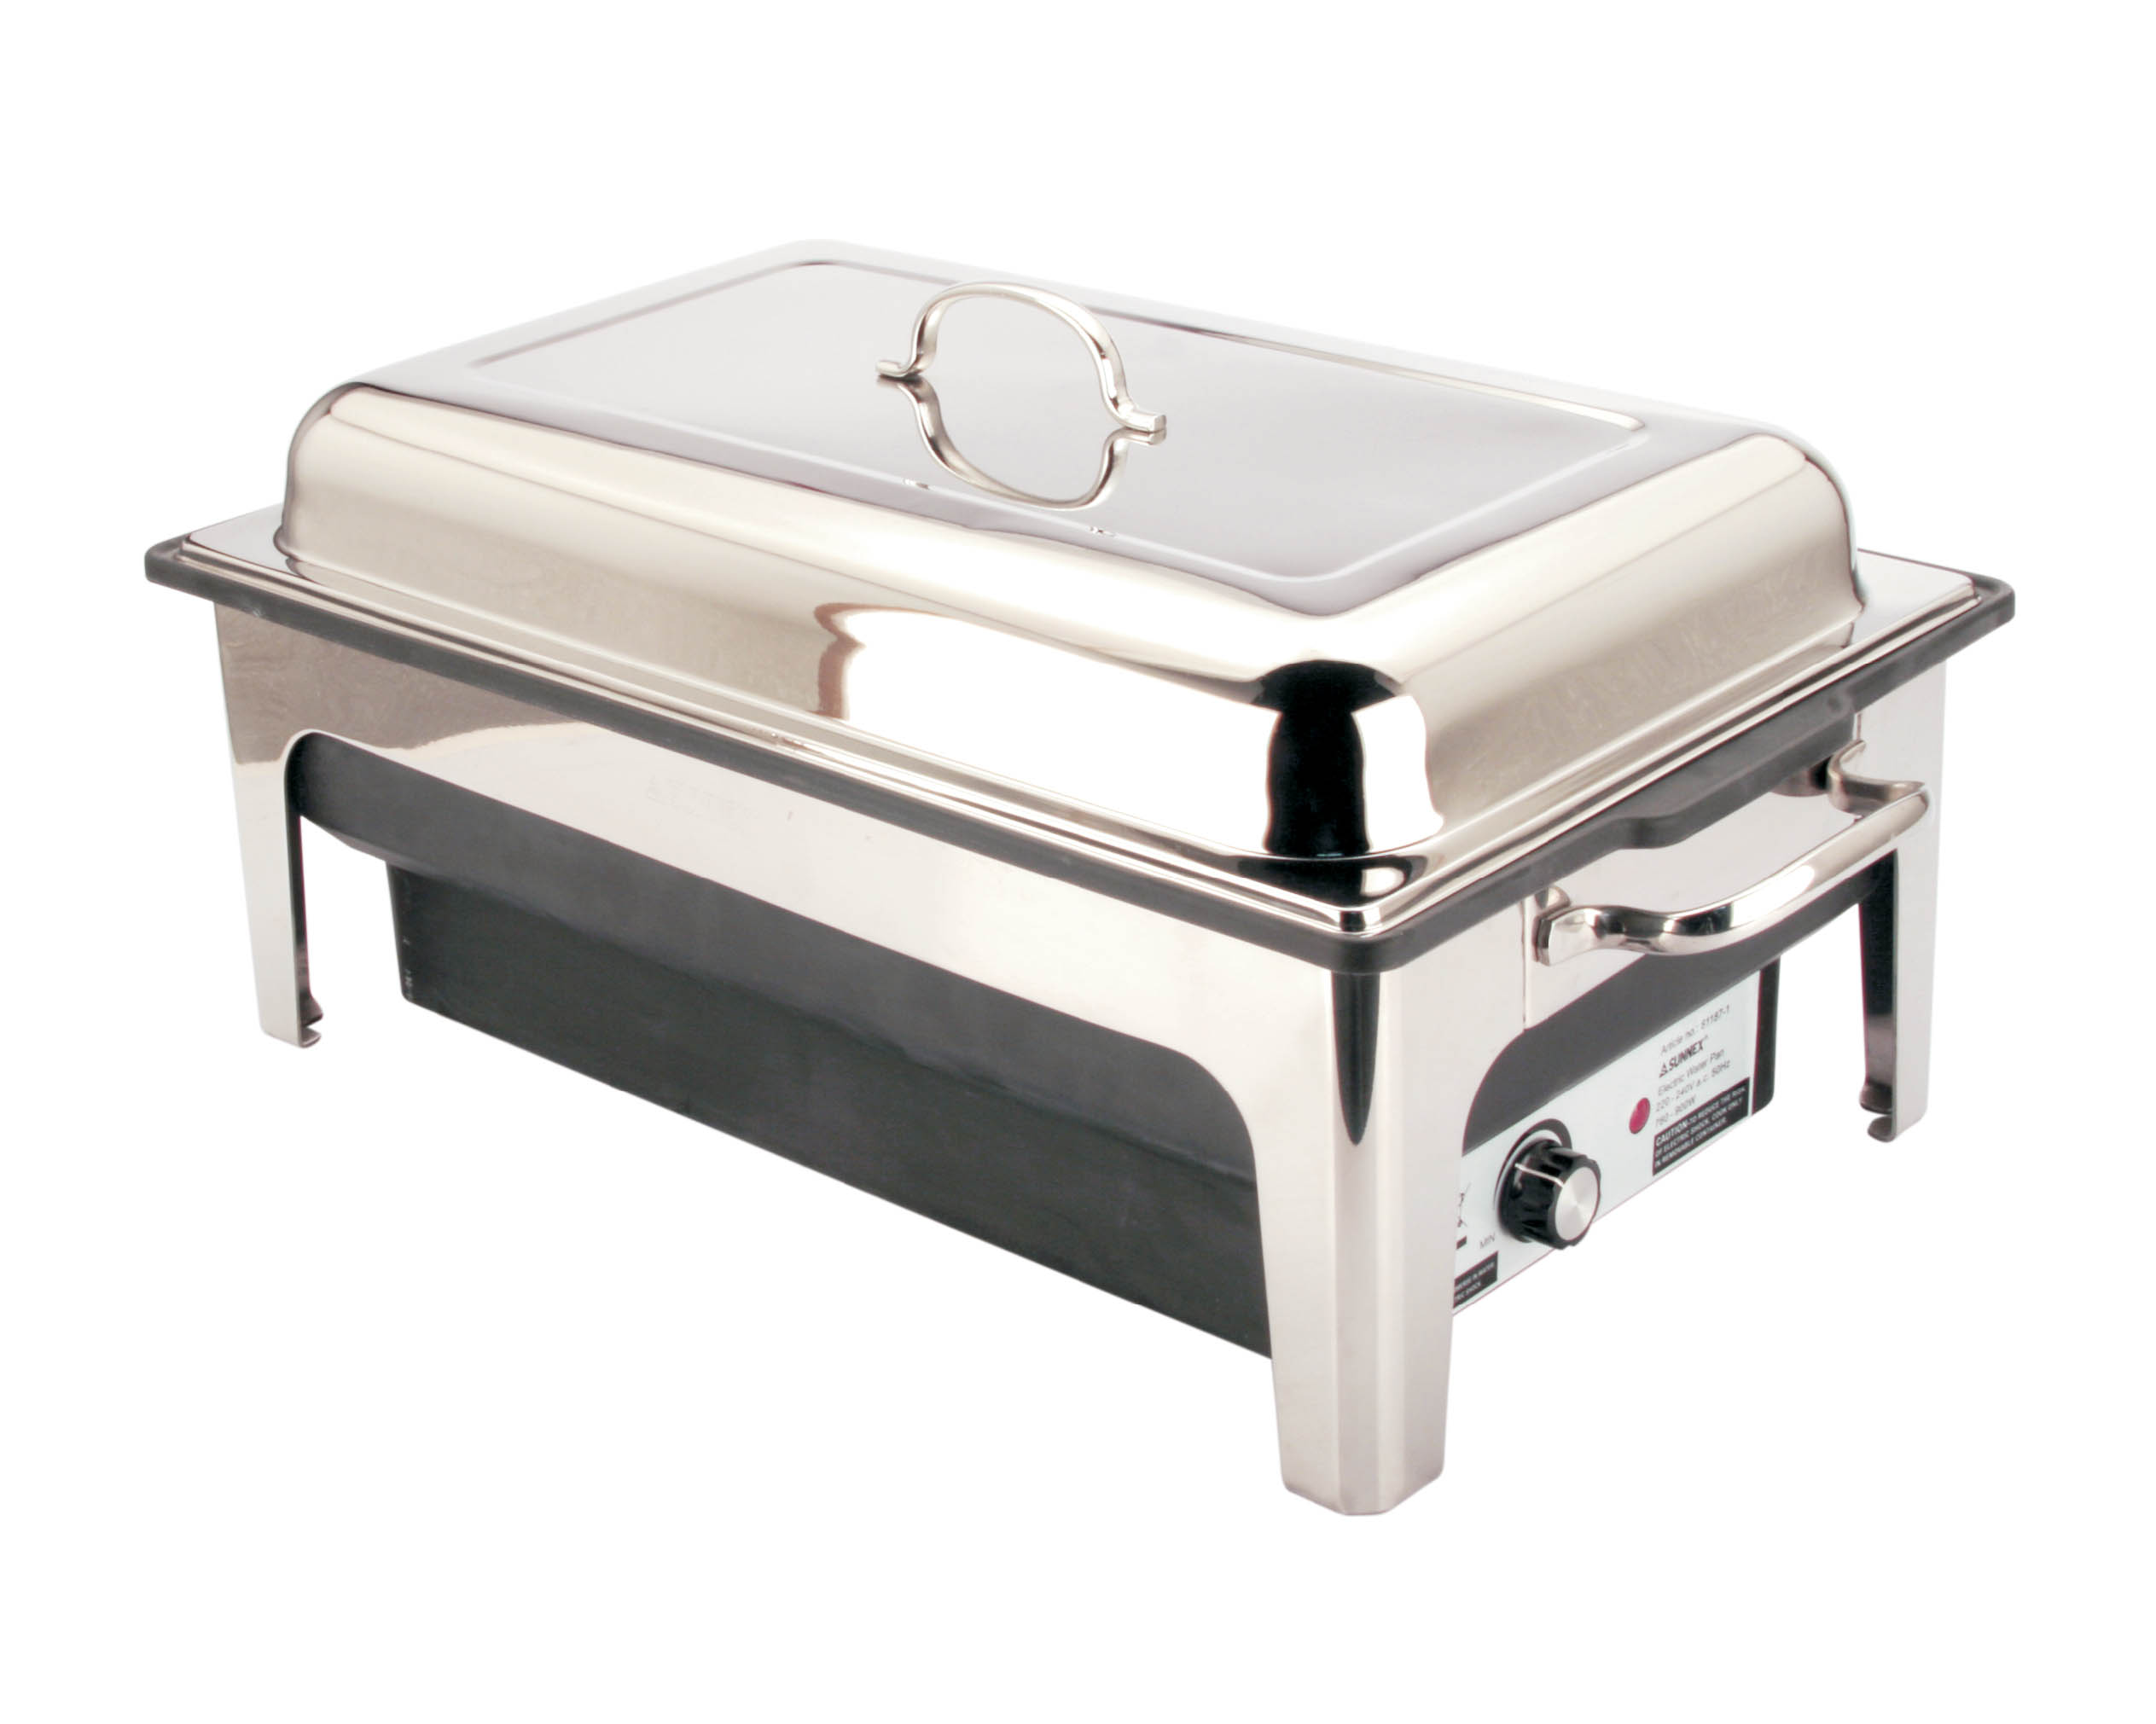 Electric Chafer 13.5 ltr Chafing Dish Set for safe odour free Hot Food